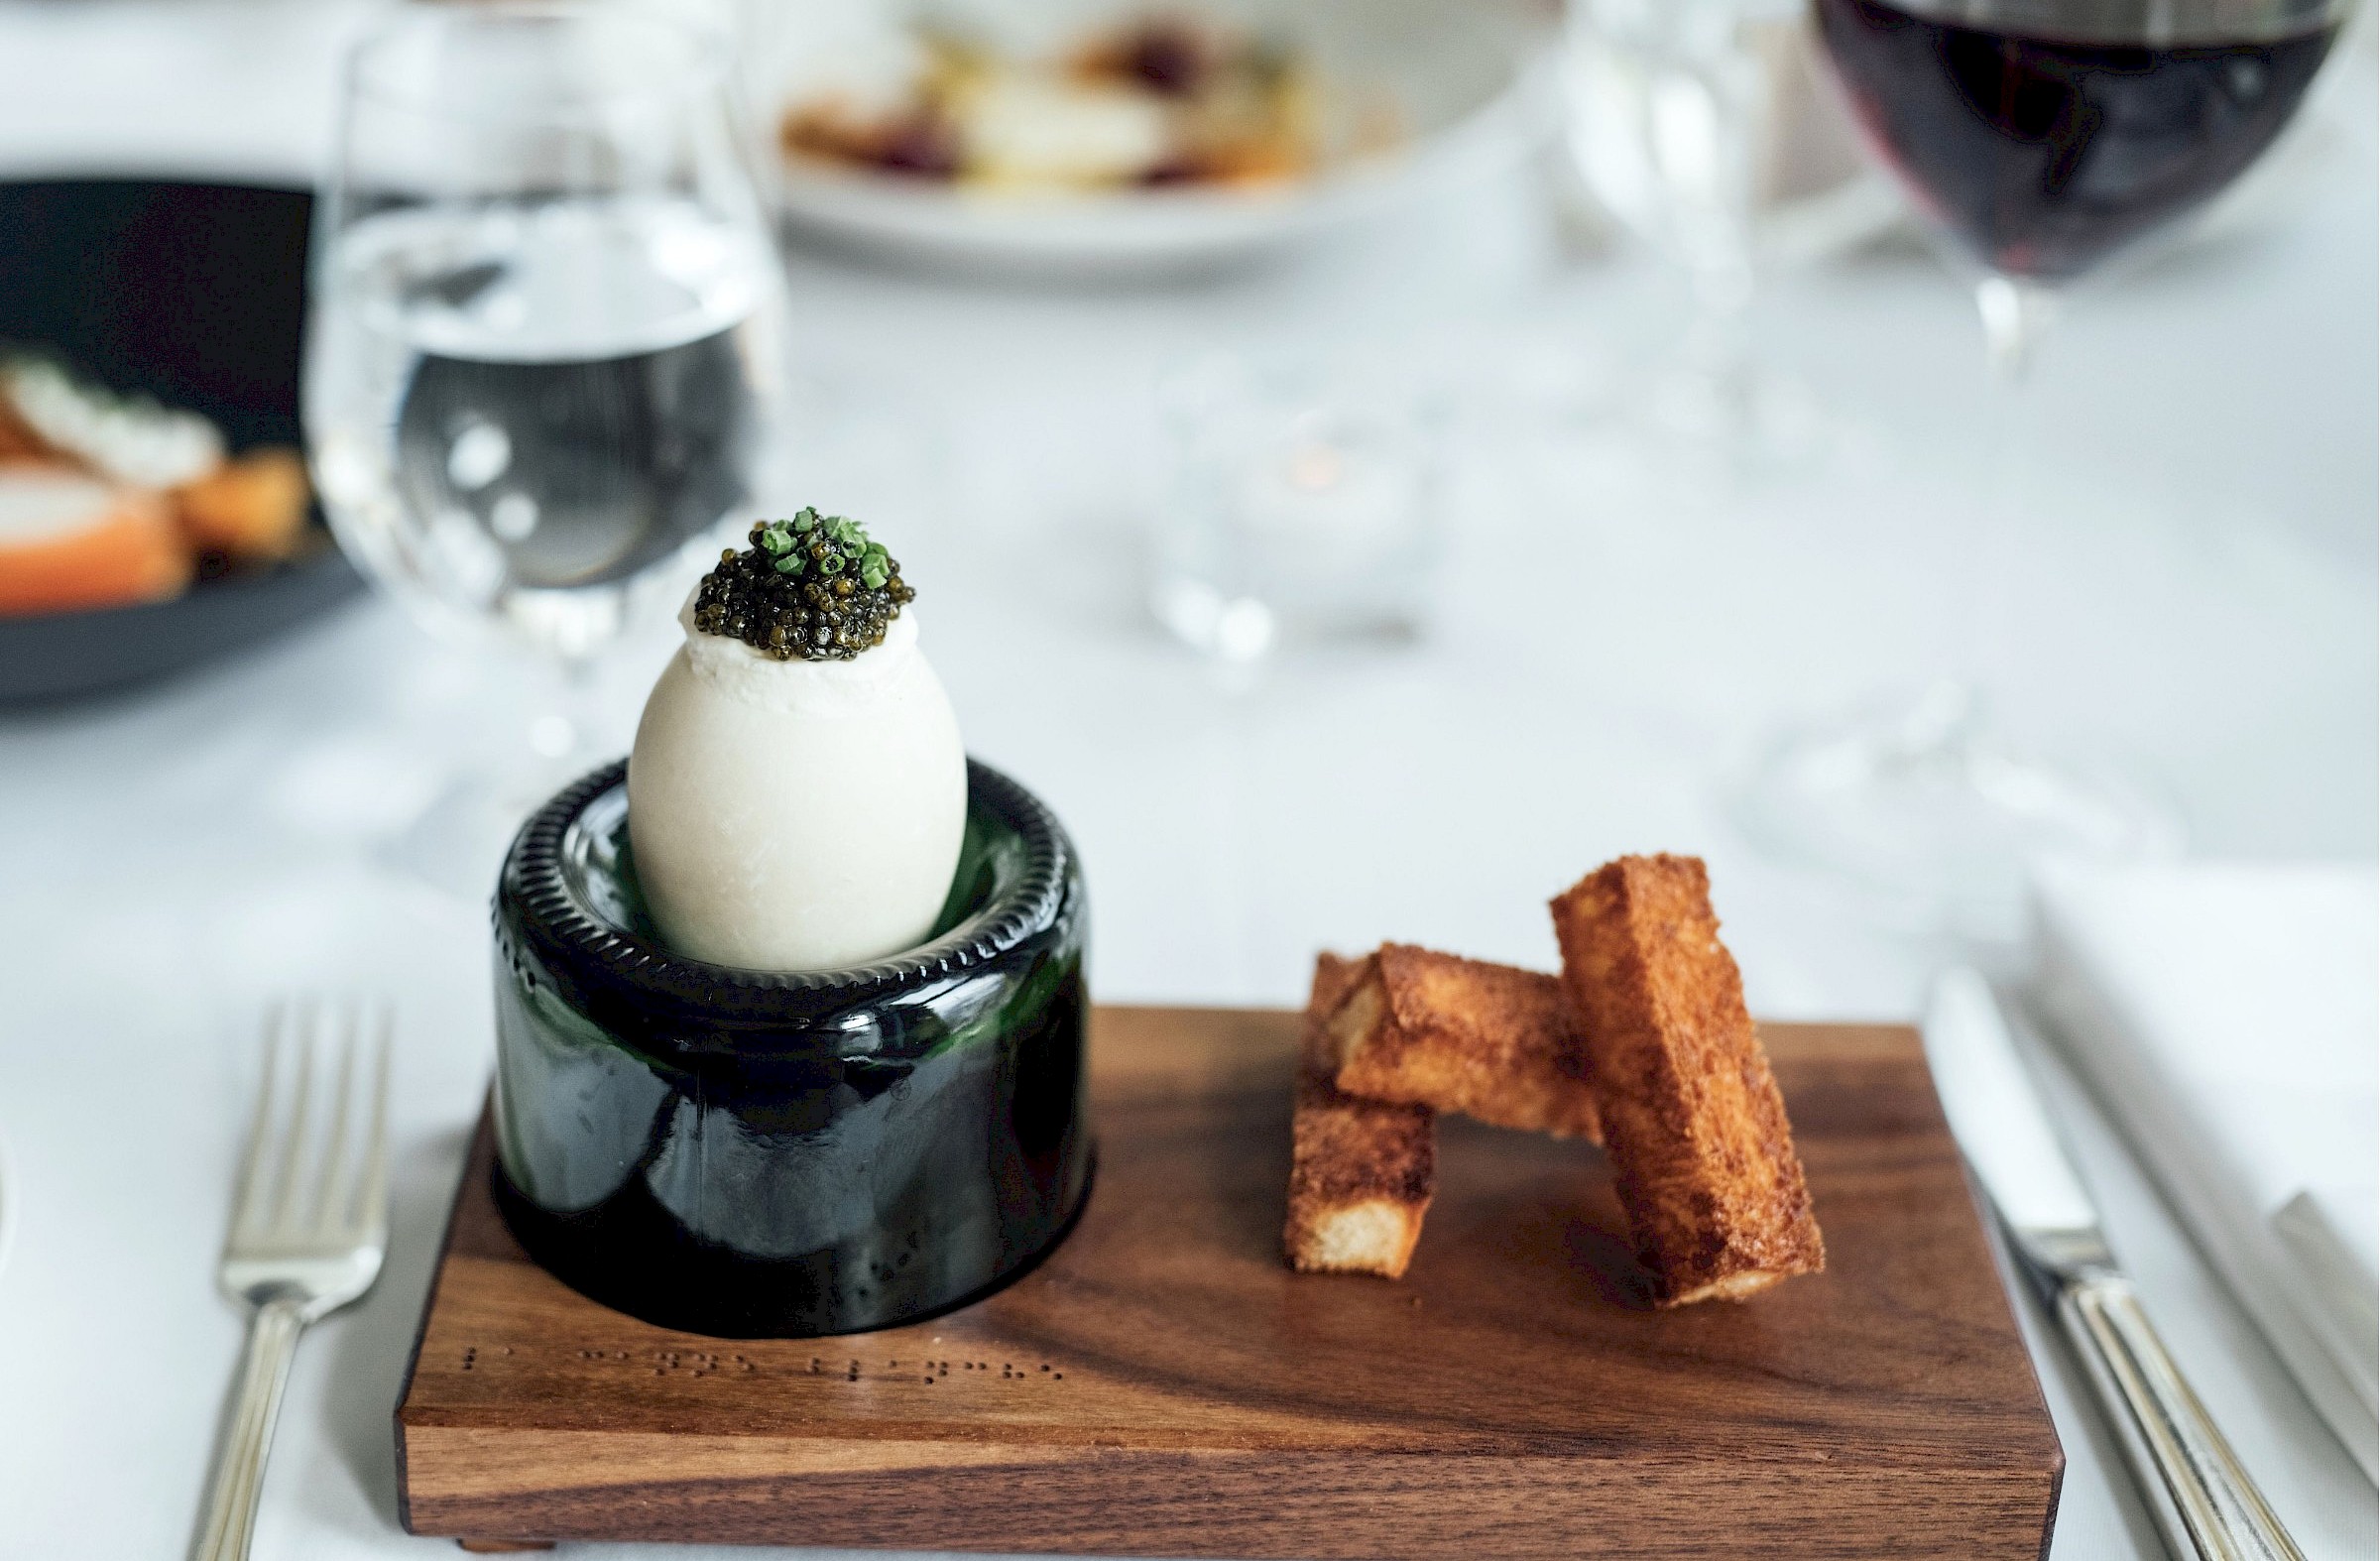 Duck egg on a wooden slab in the restaurant